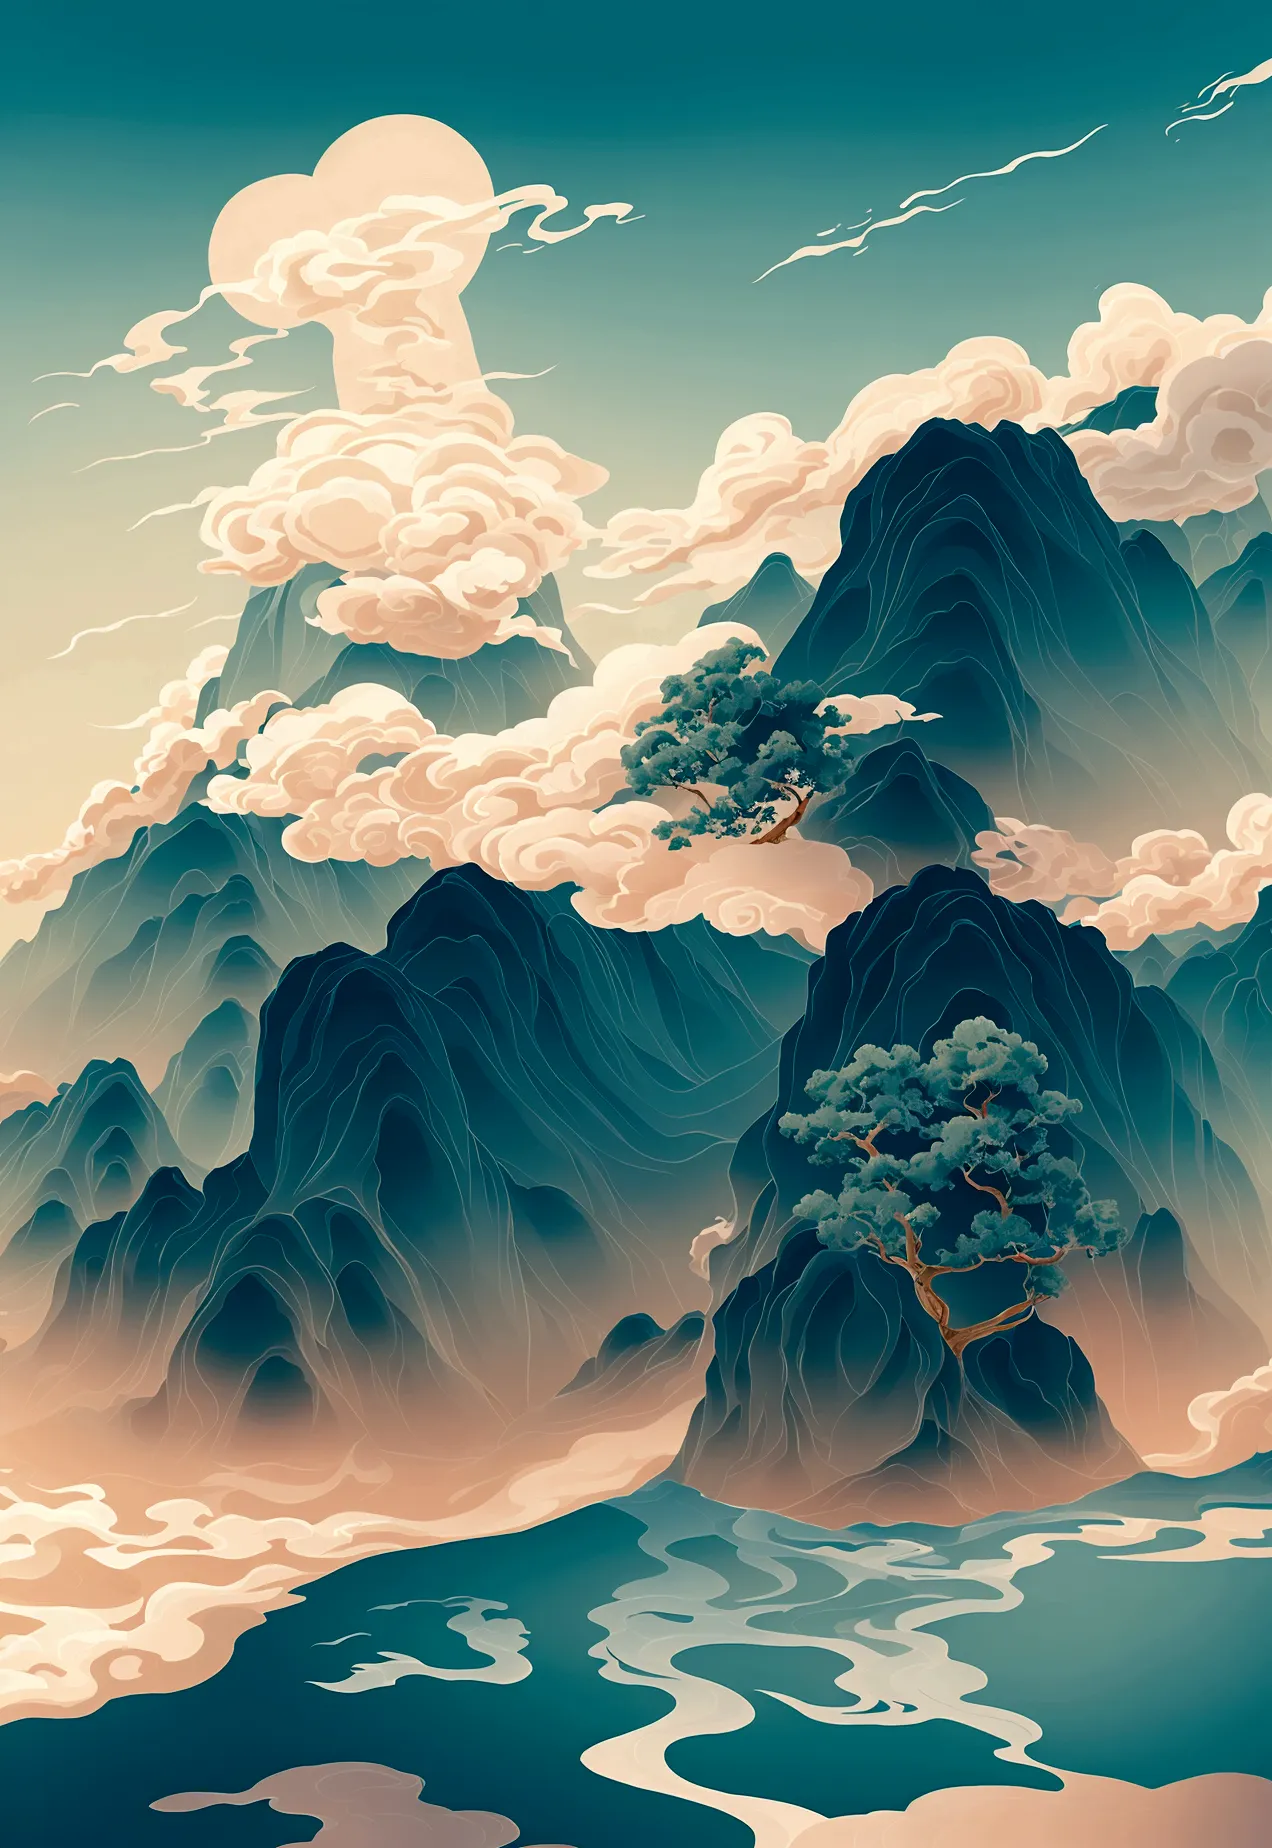 Generate a scene with a cliff from bottom to top and a sea of clouds below